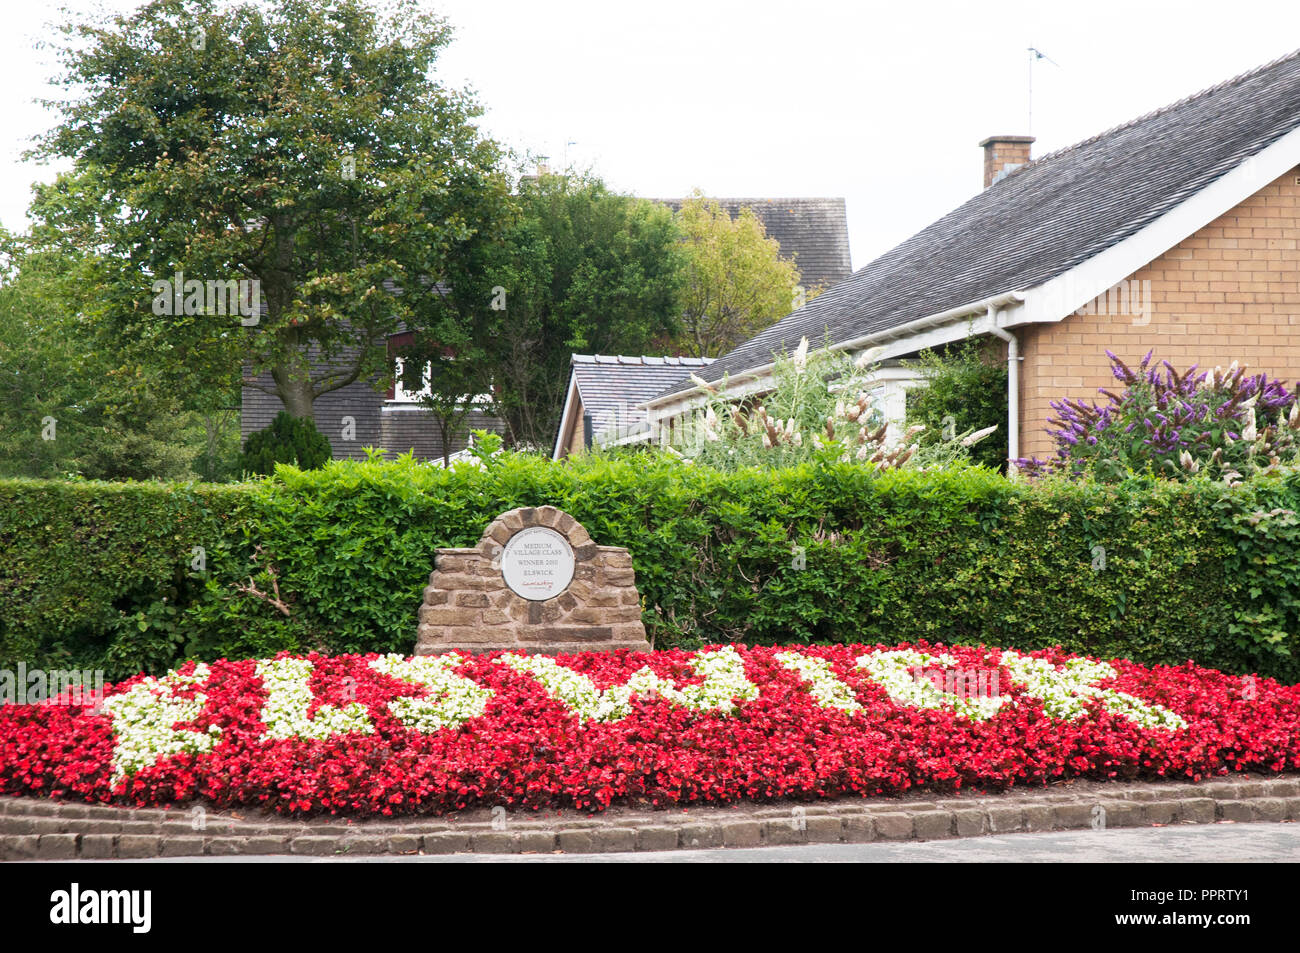 Red and White Begonia semperflorens in flower bed spelling out the name of village Elswick. Winner of Lancashire Best kept village.medium class 2010. Stock Photo